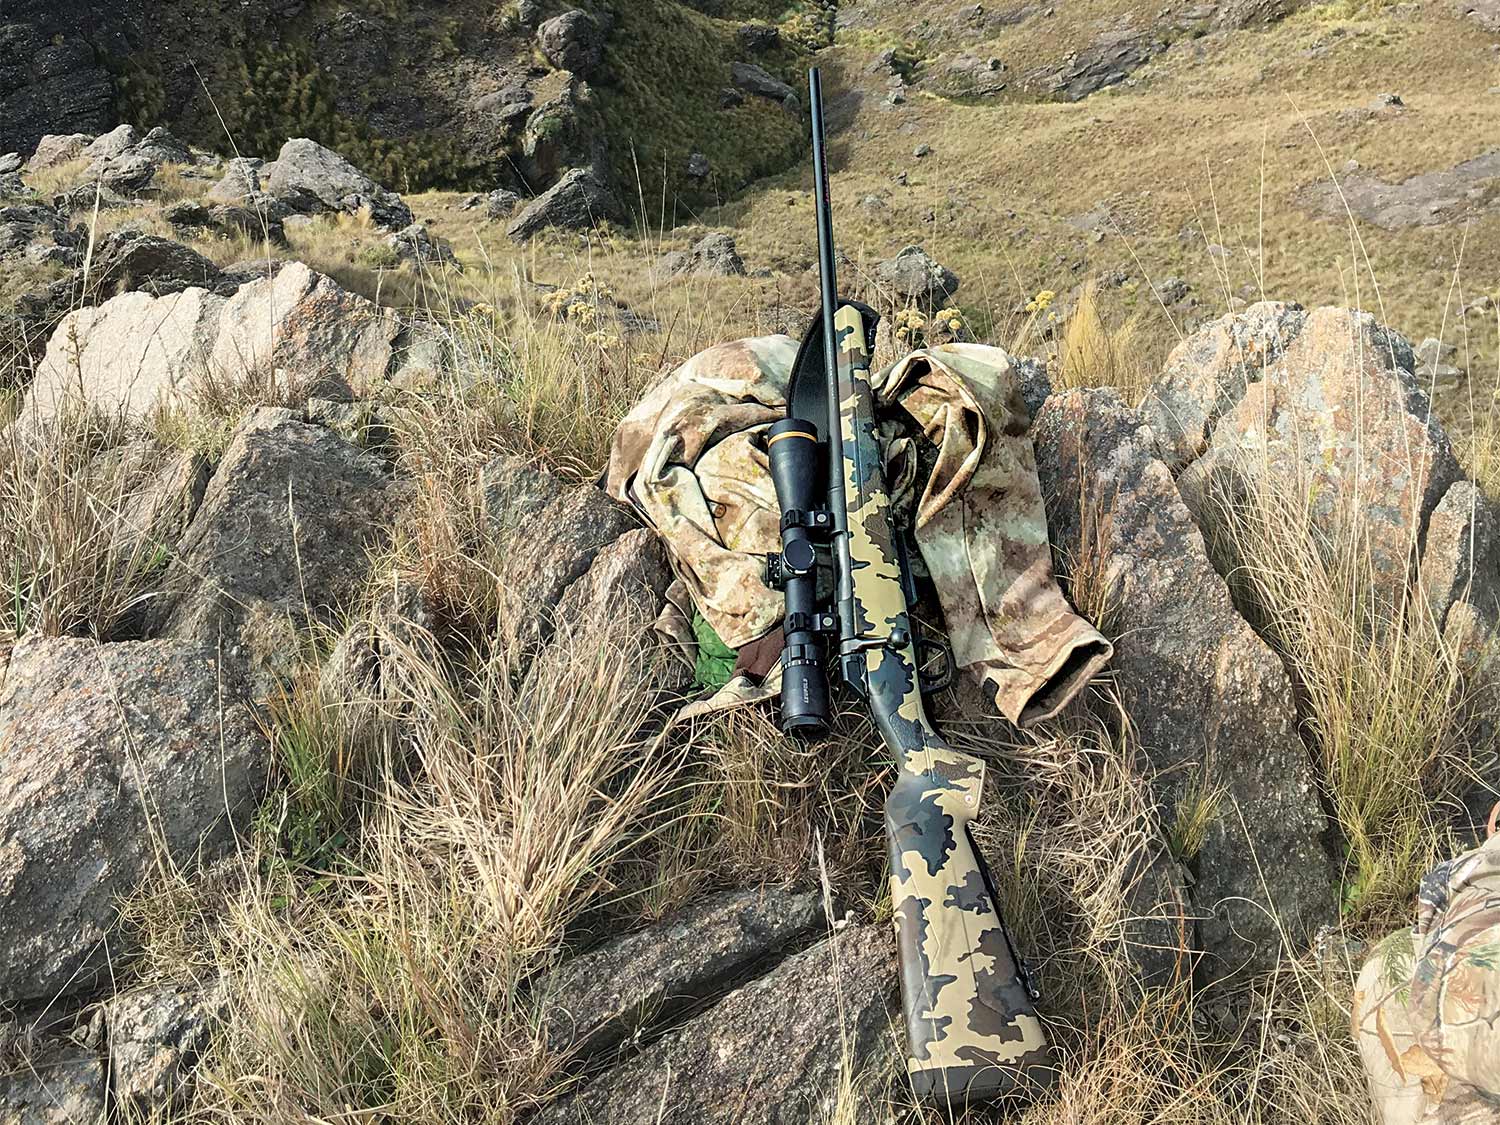 a Winchester xpr rifle leaning against rocks